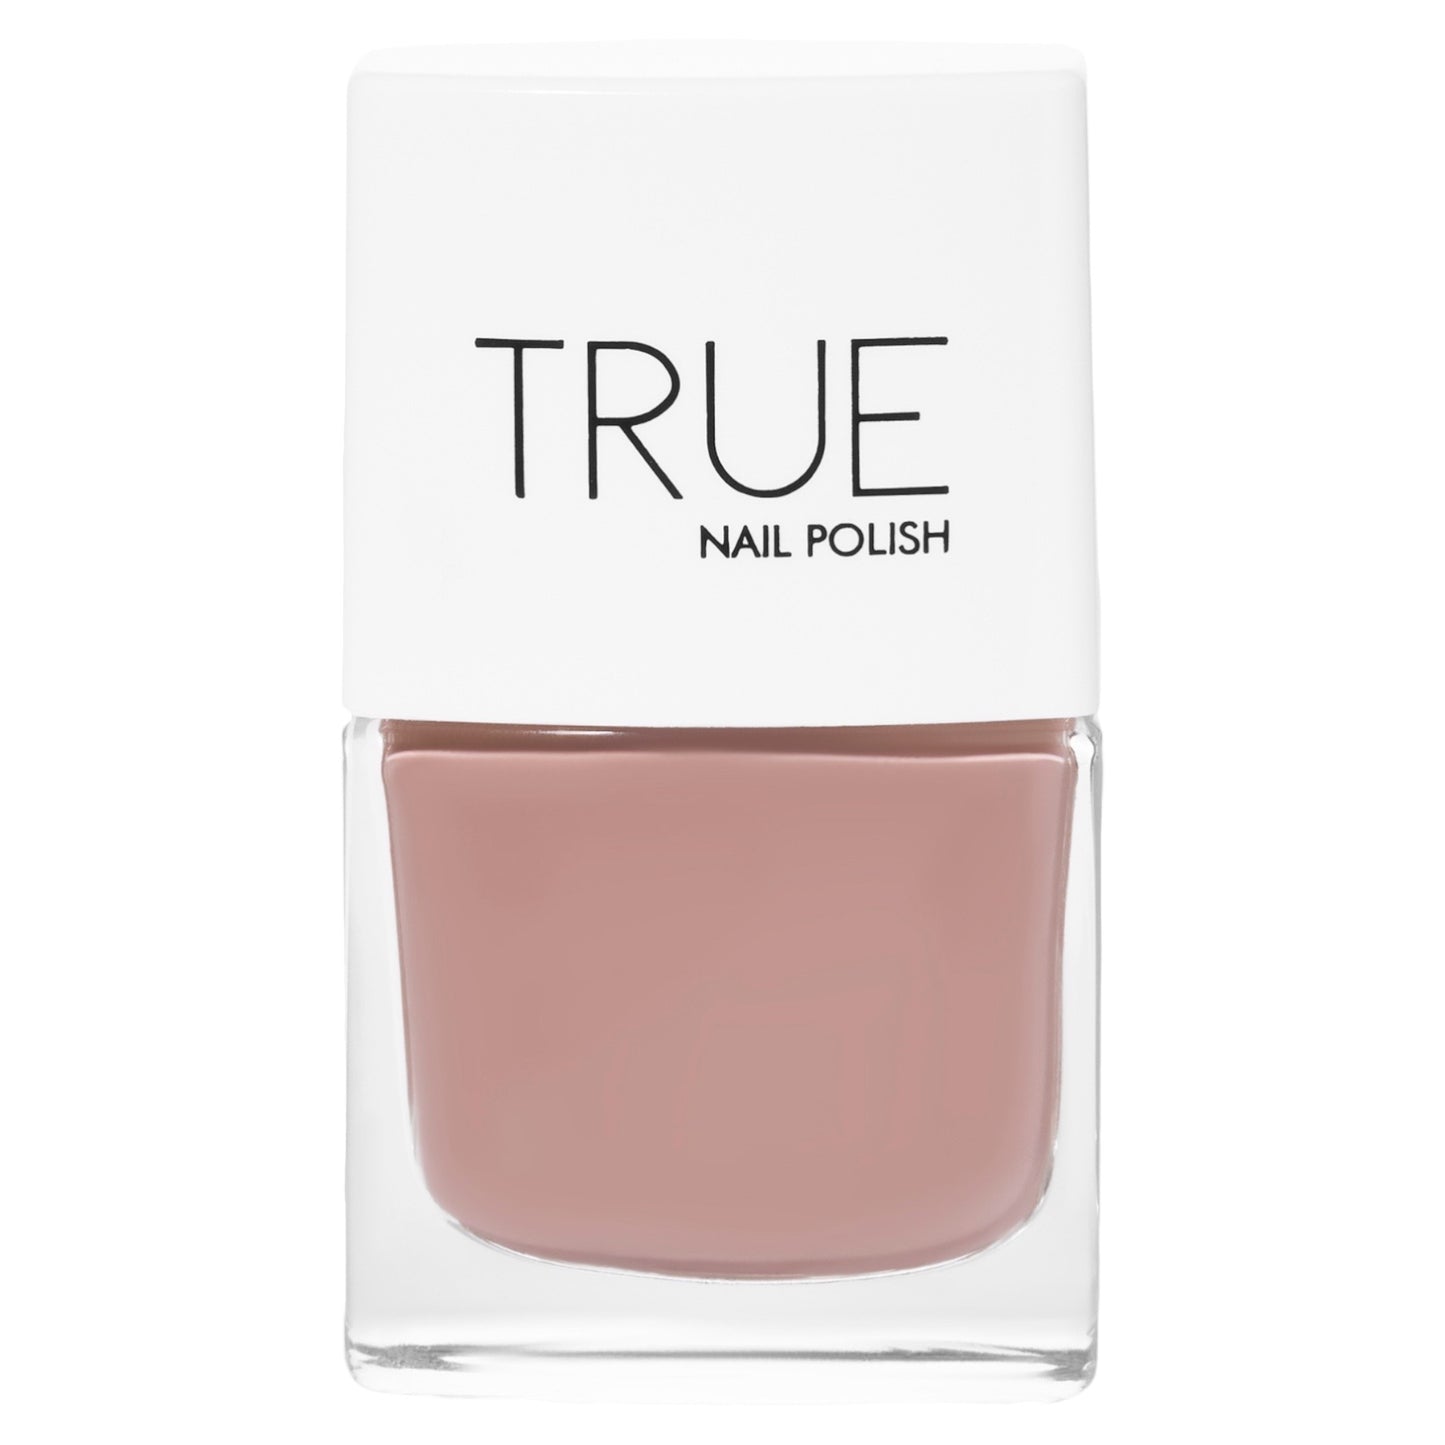 A picture of Sugar & Spice a mink shade from True Nail Polish 